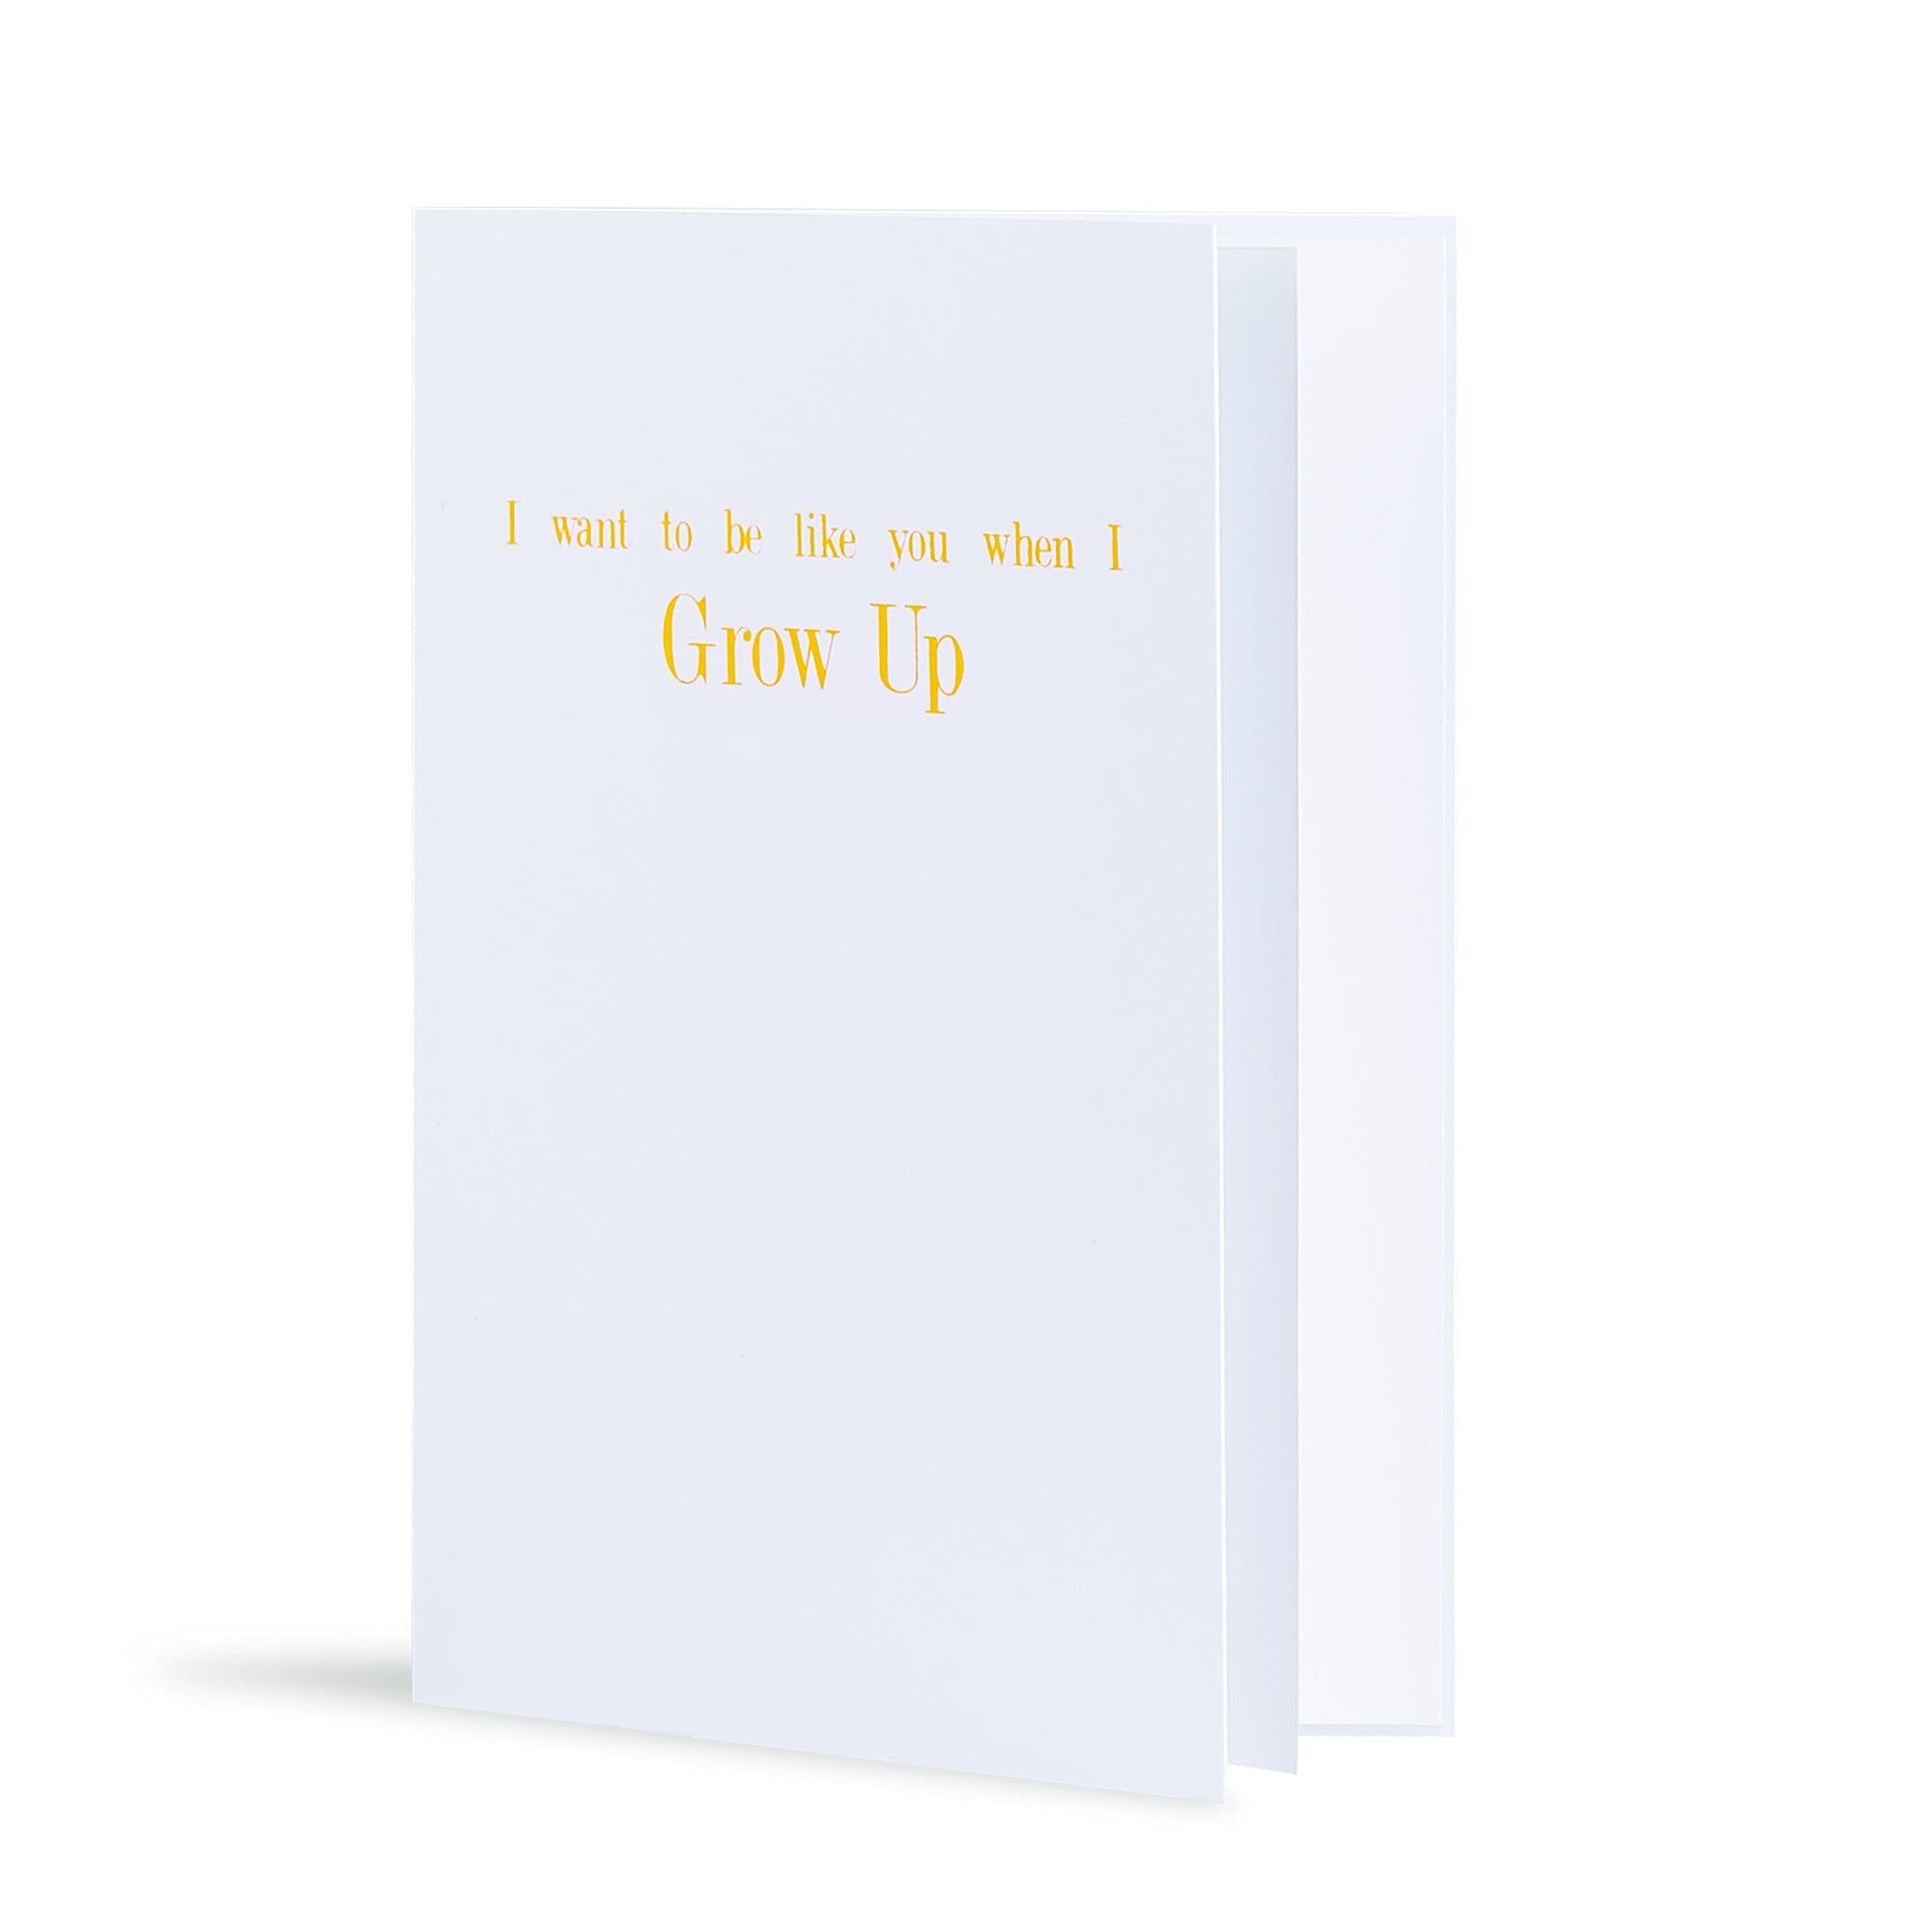 I Want To Be Like You When I Grow Up Greeting Card in White, Side